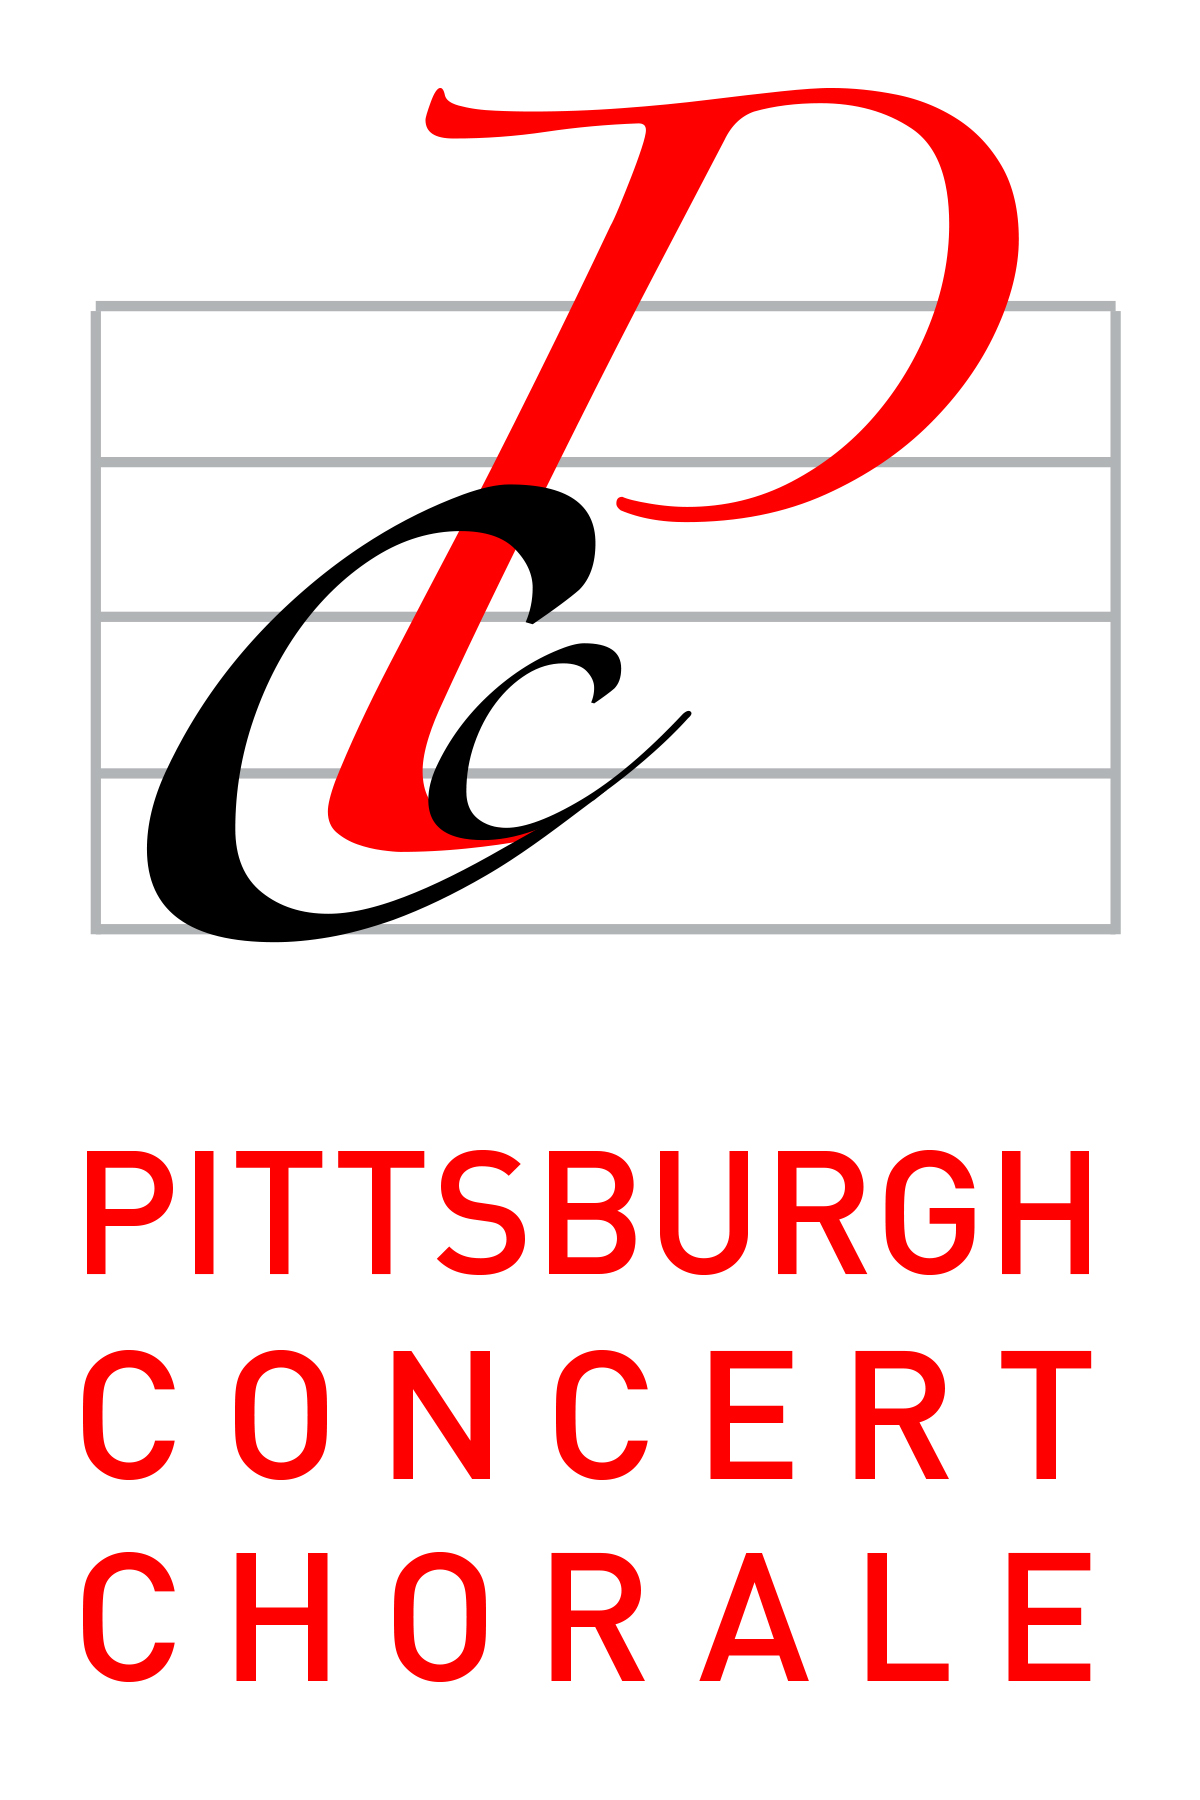 Pittsburgh Concert Chorale logo